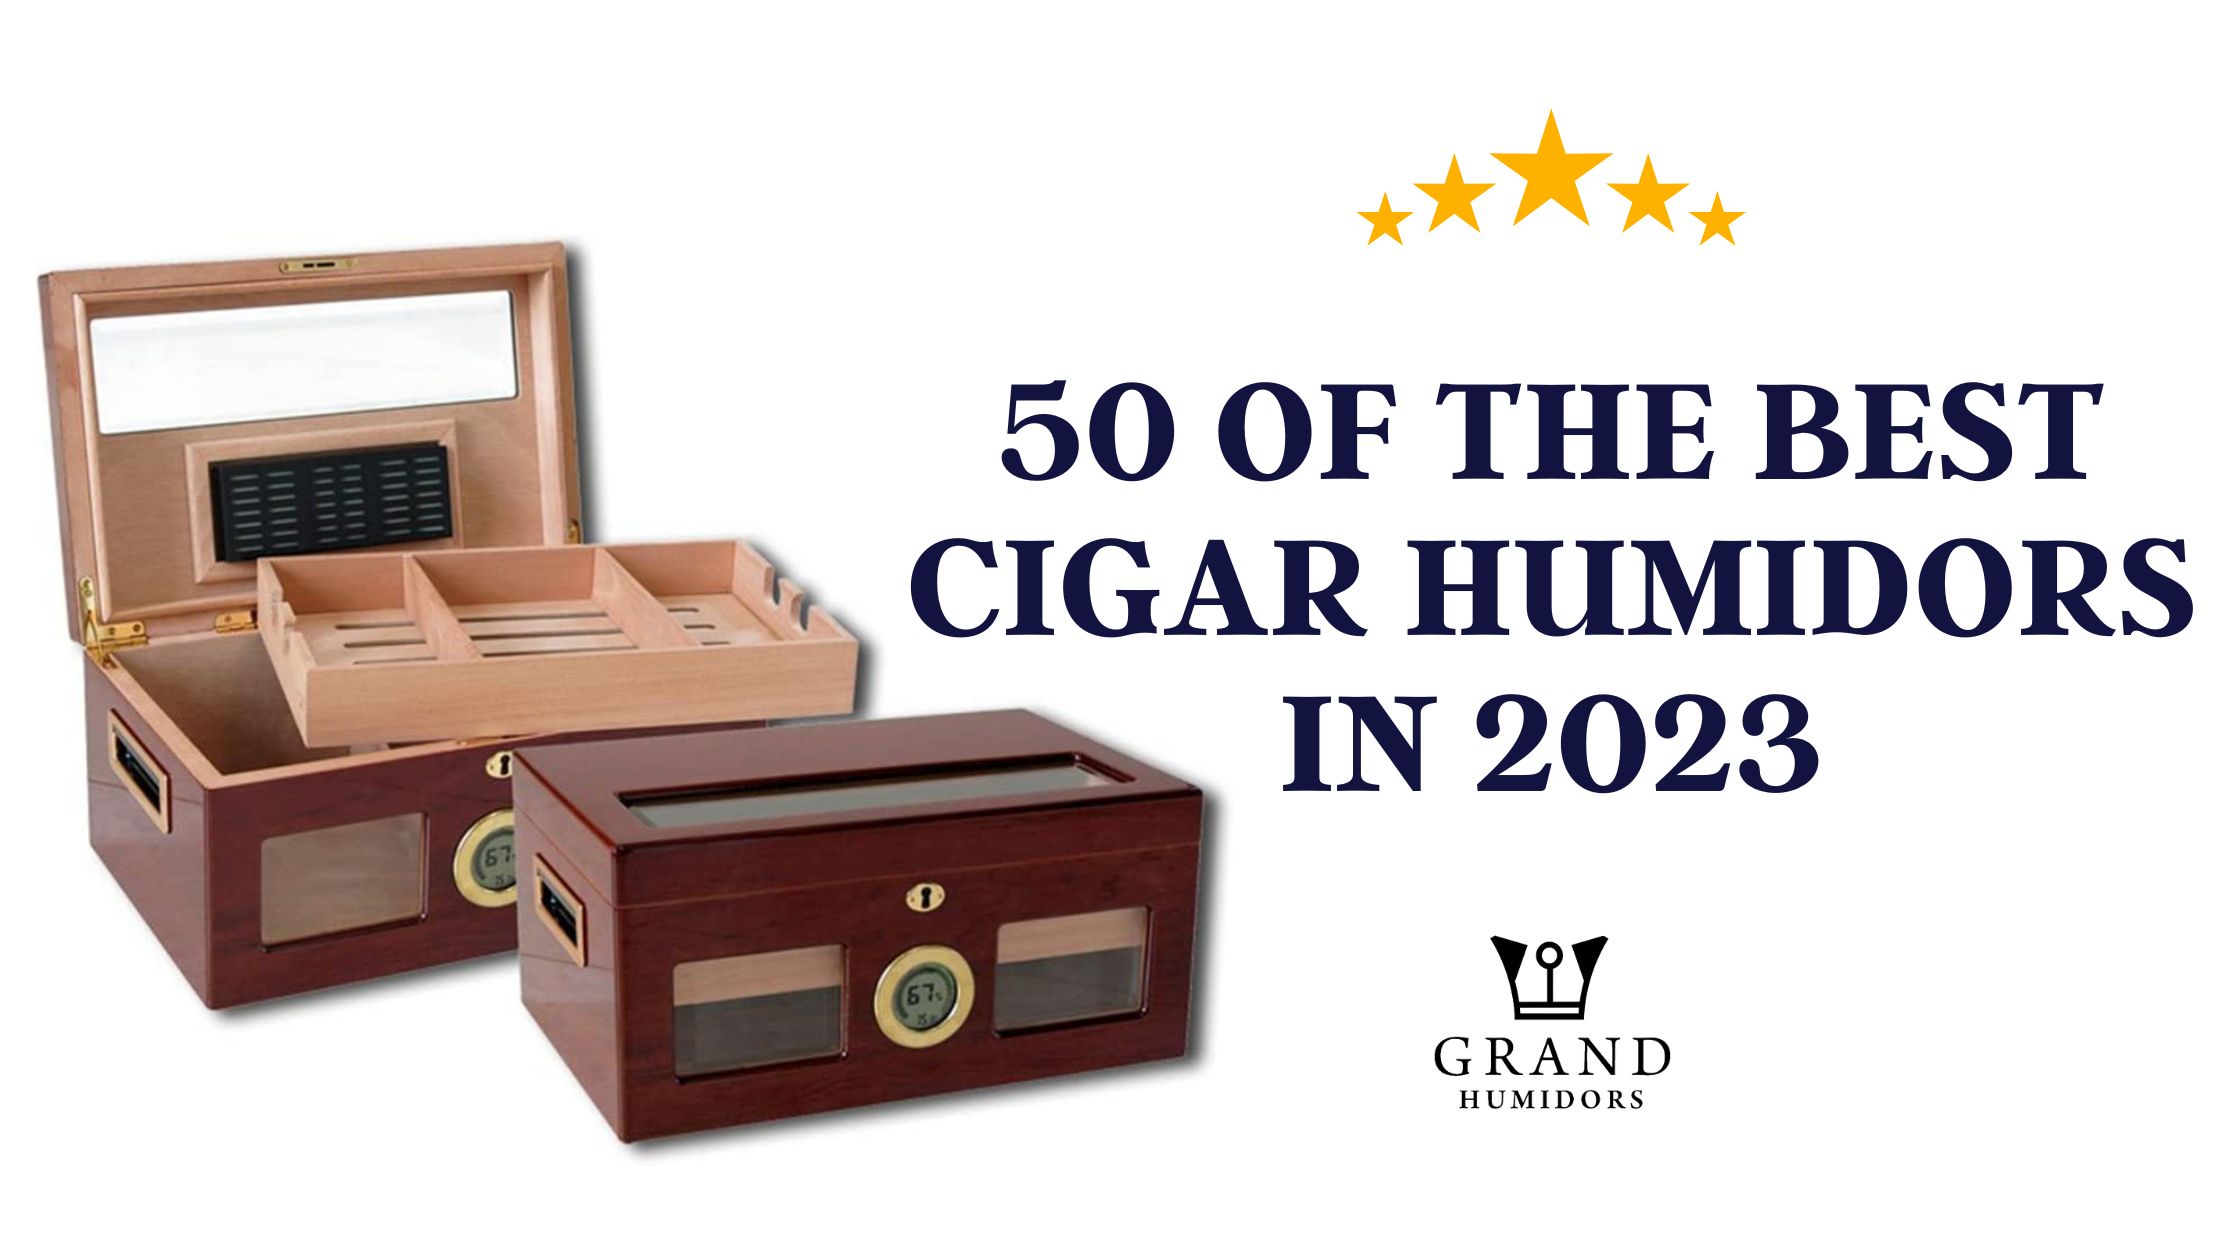 The Top 5 of Cigar Humidors by Luxury Brands - Excellence Magazine